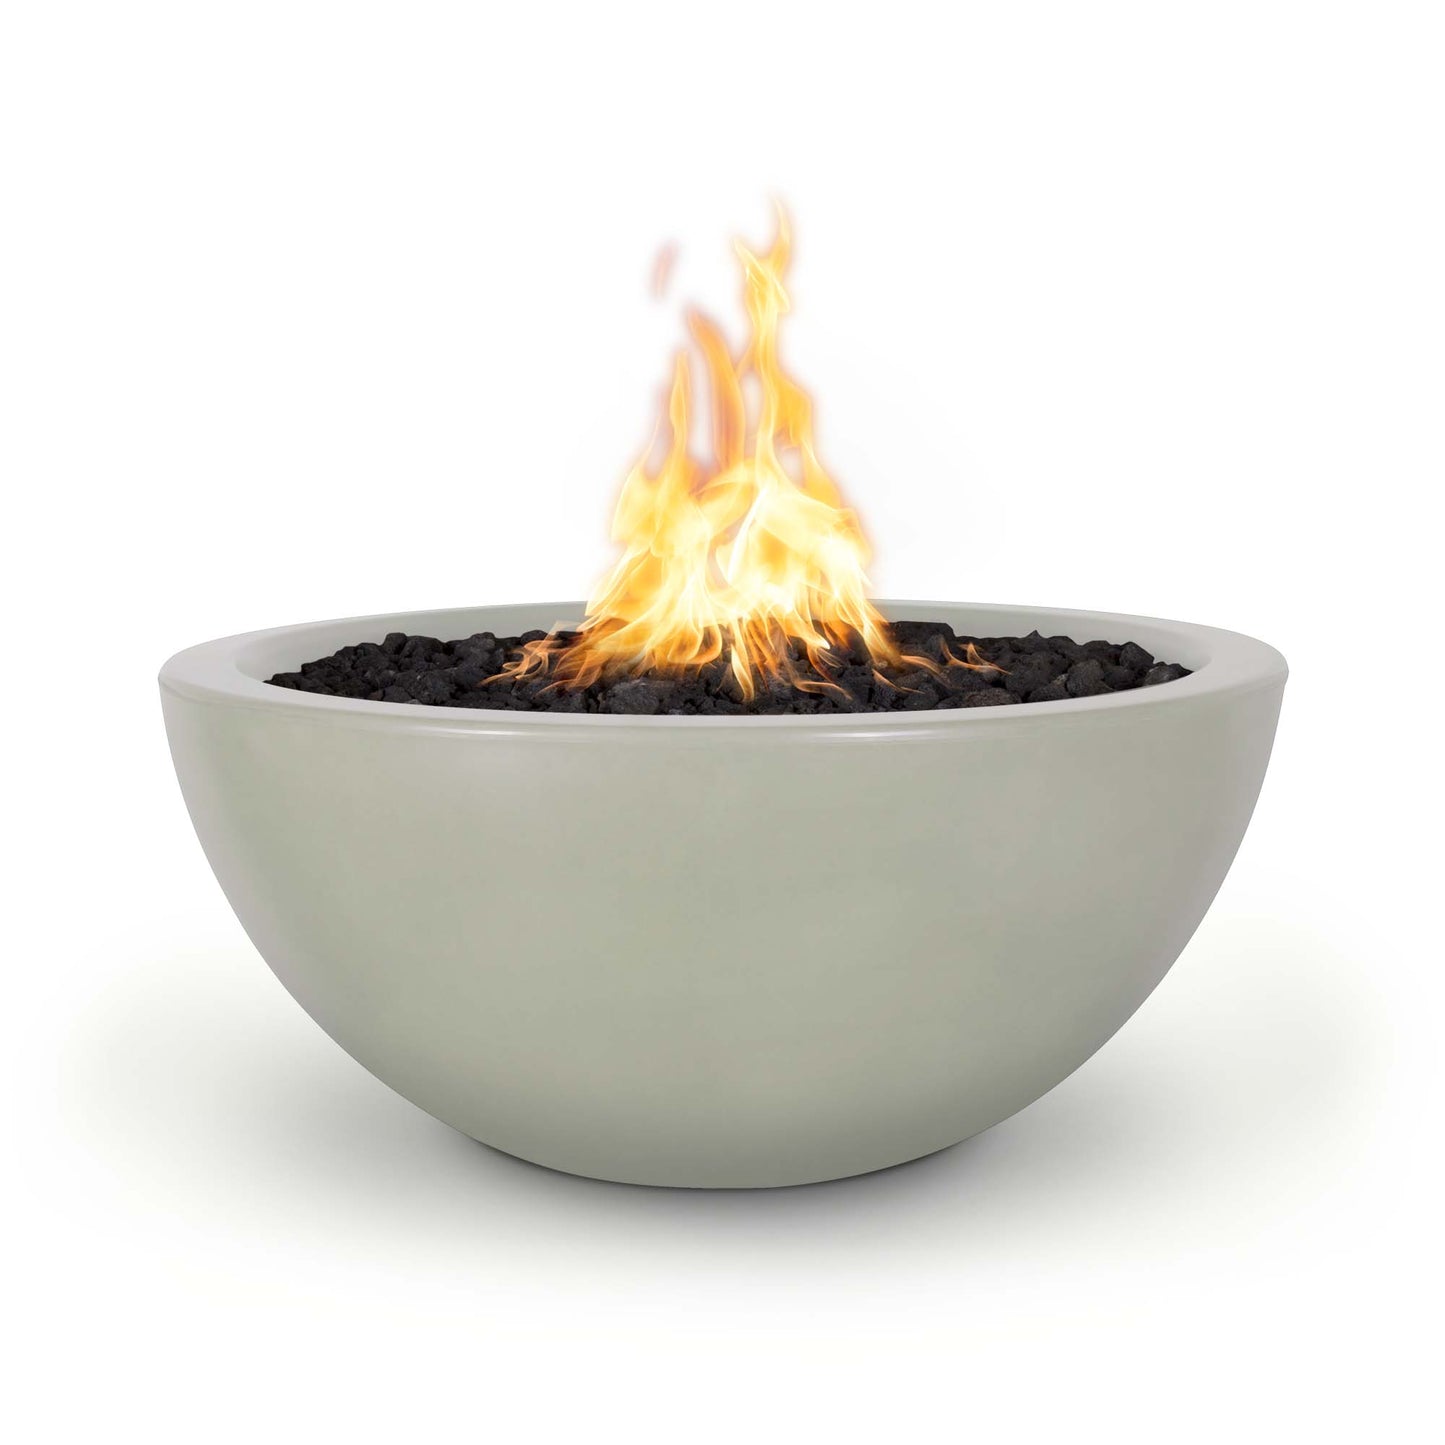 The Outdoor Plus Round Luna 30" Metallic Silver GFRC Concrete Liquid Propane Fire Bowl with Match Lit with Flame Sense Ignition